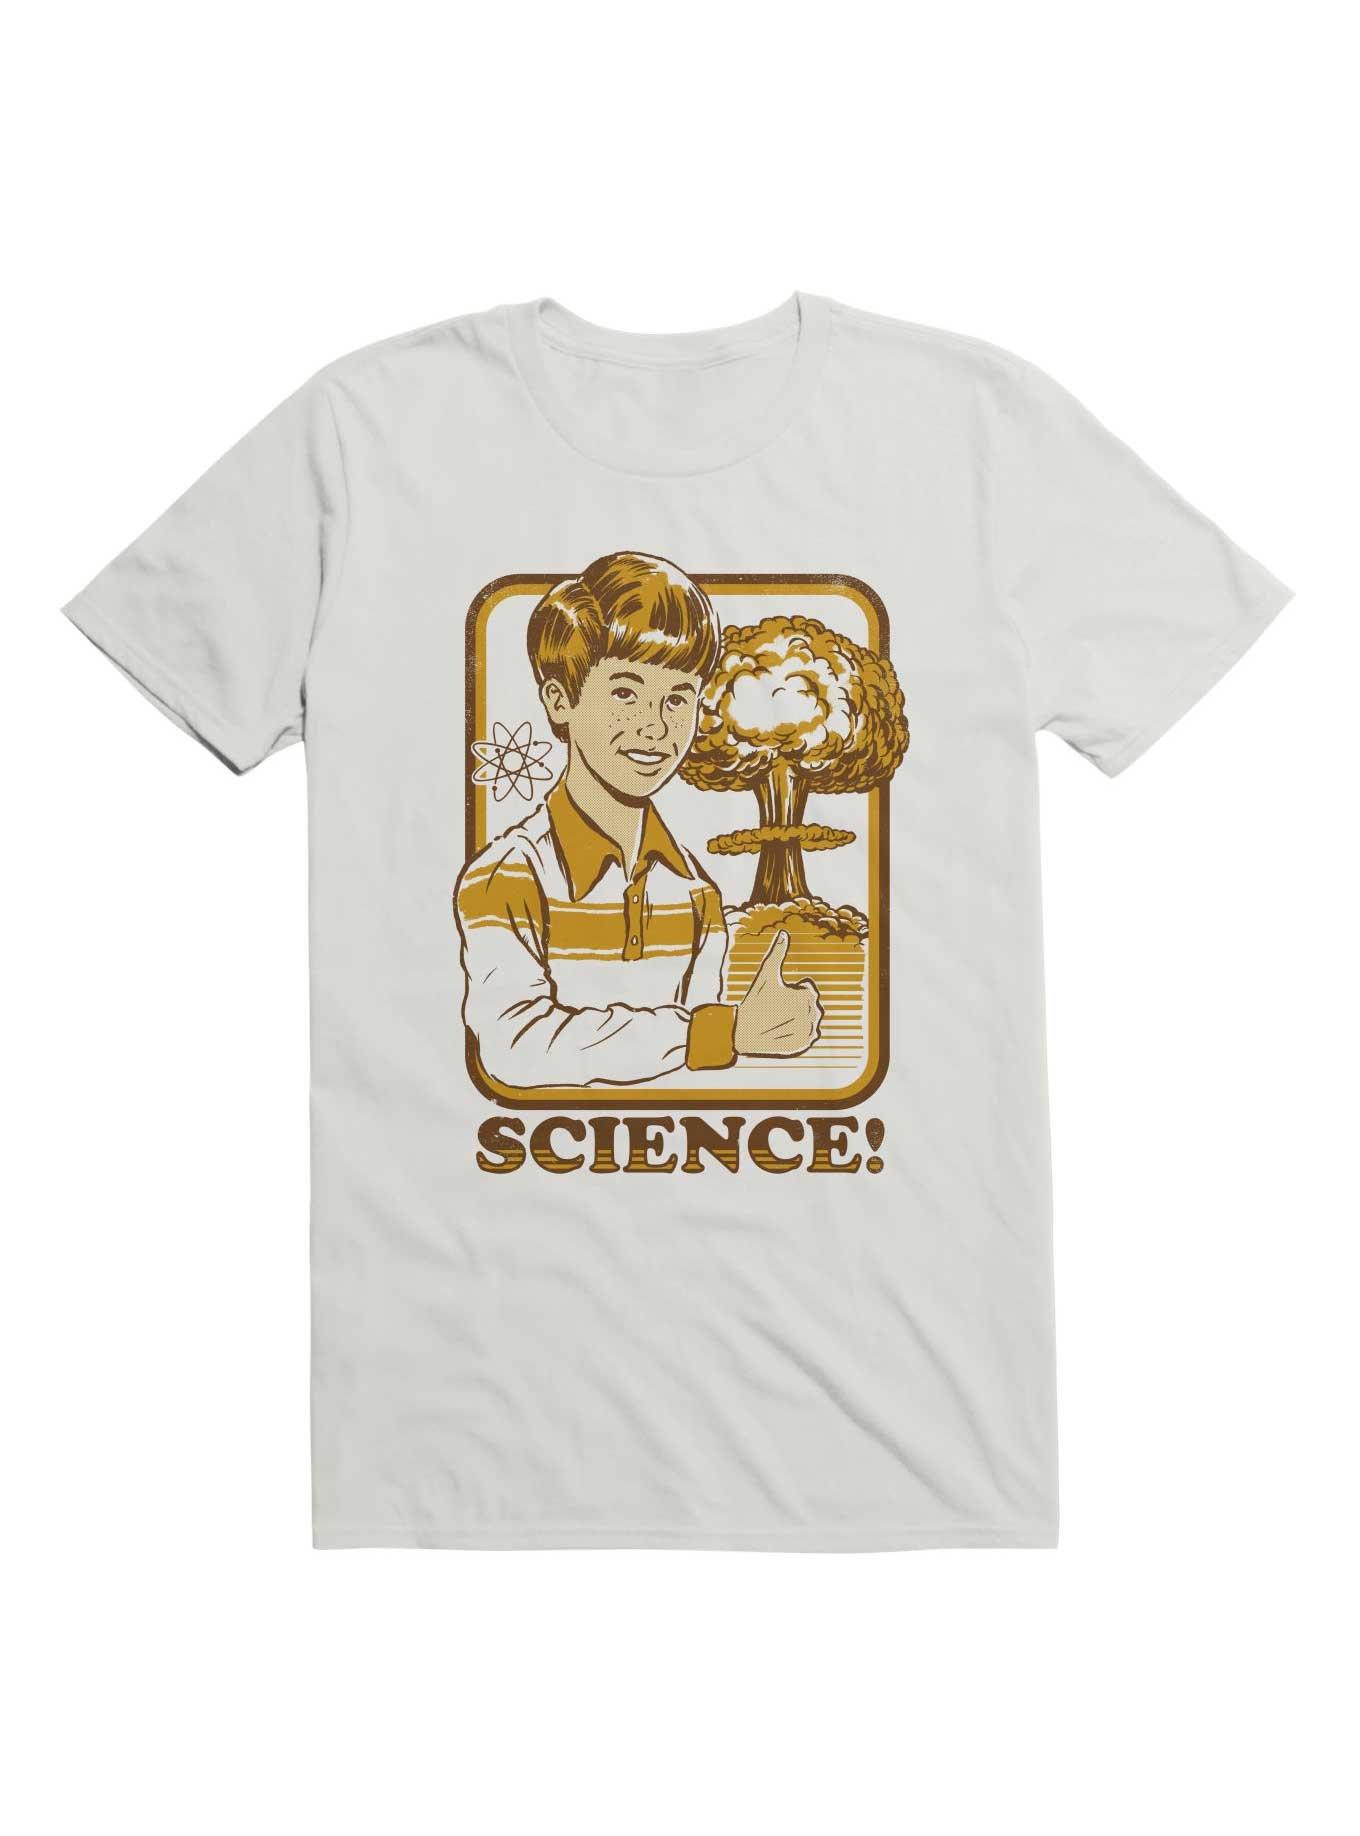 SCIENCE! Variant 2 T-Shirt By Steven Rhodes